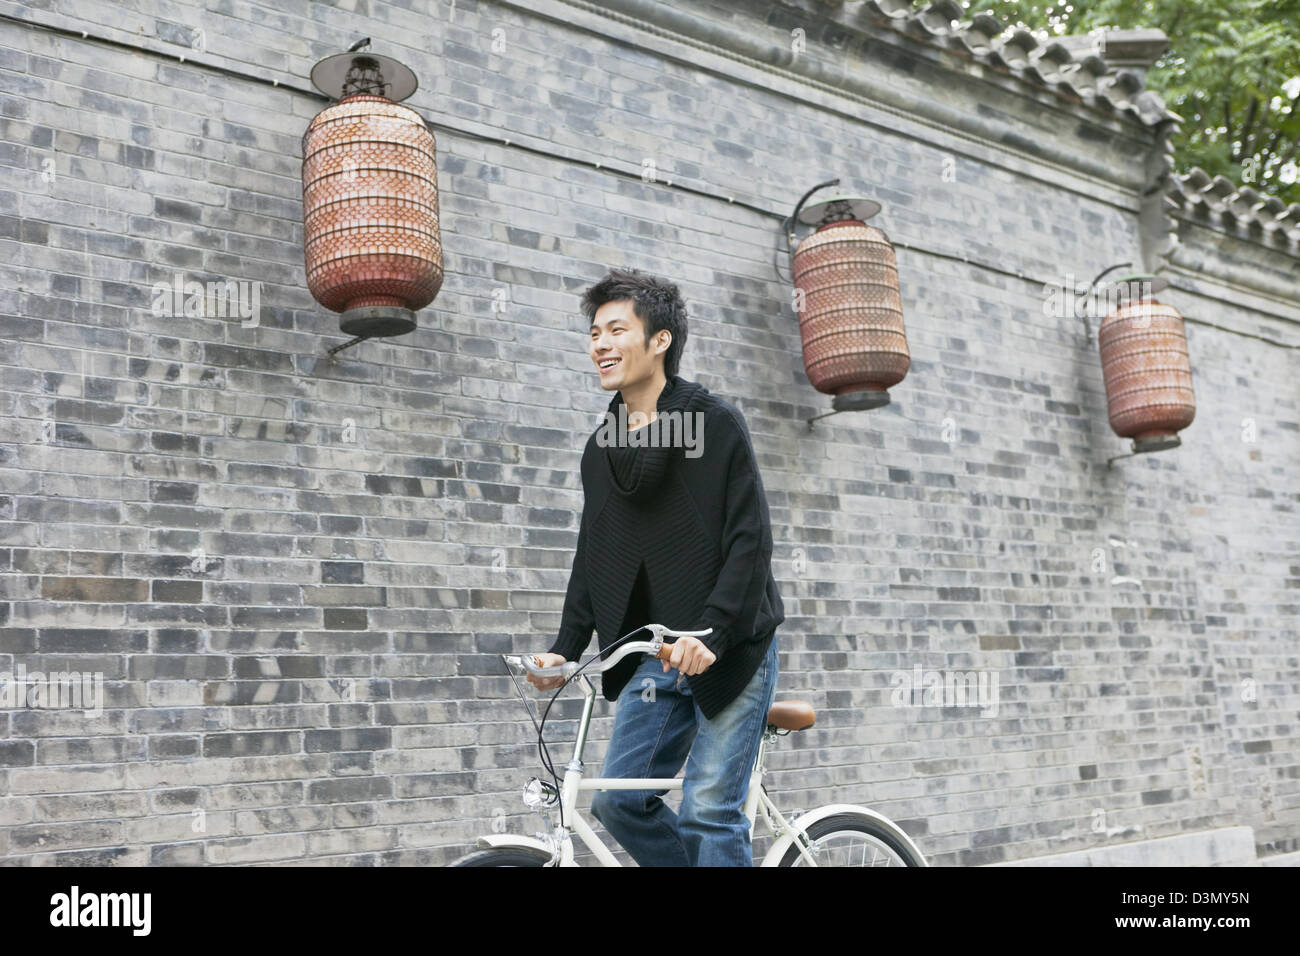 Smiling Young Asian Chinese Man in Bicycle, Beijing, China Stock Photo